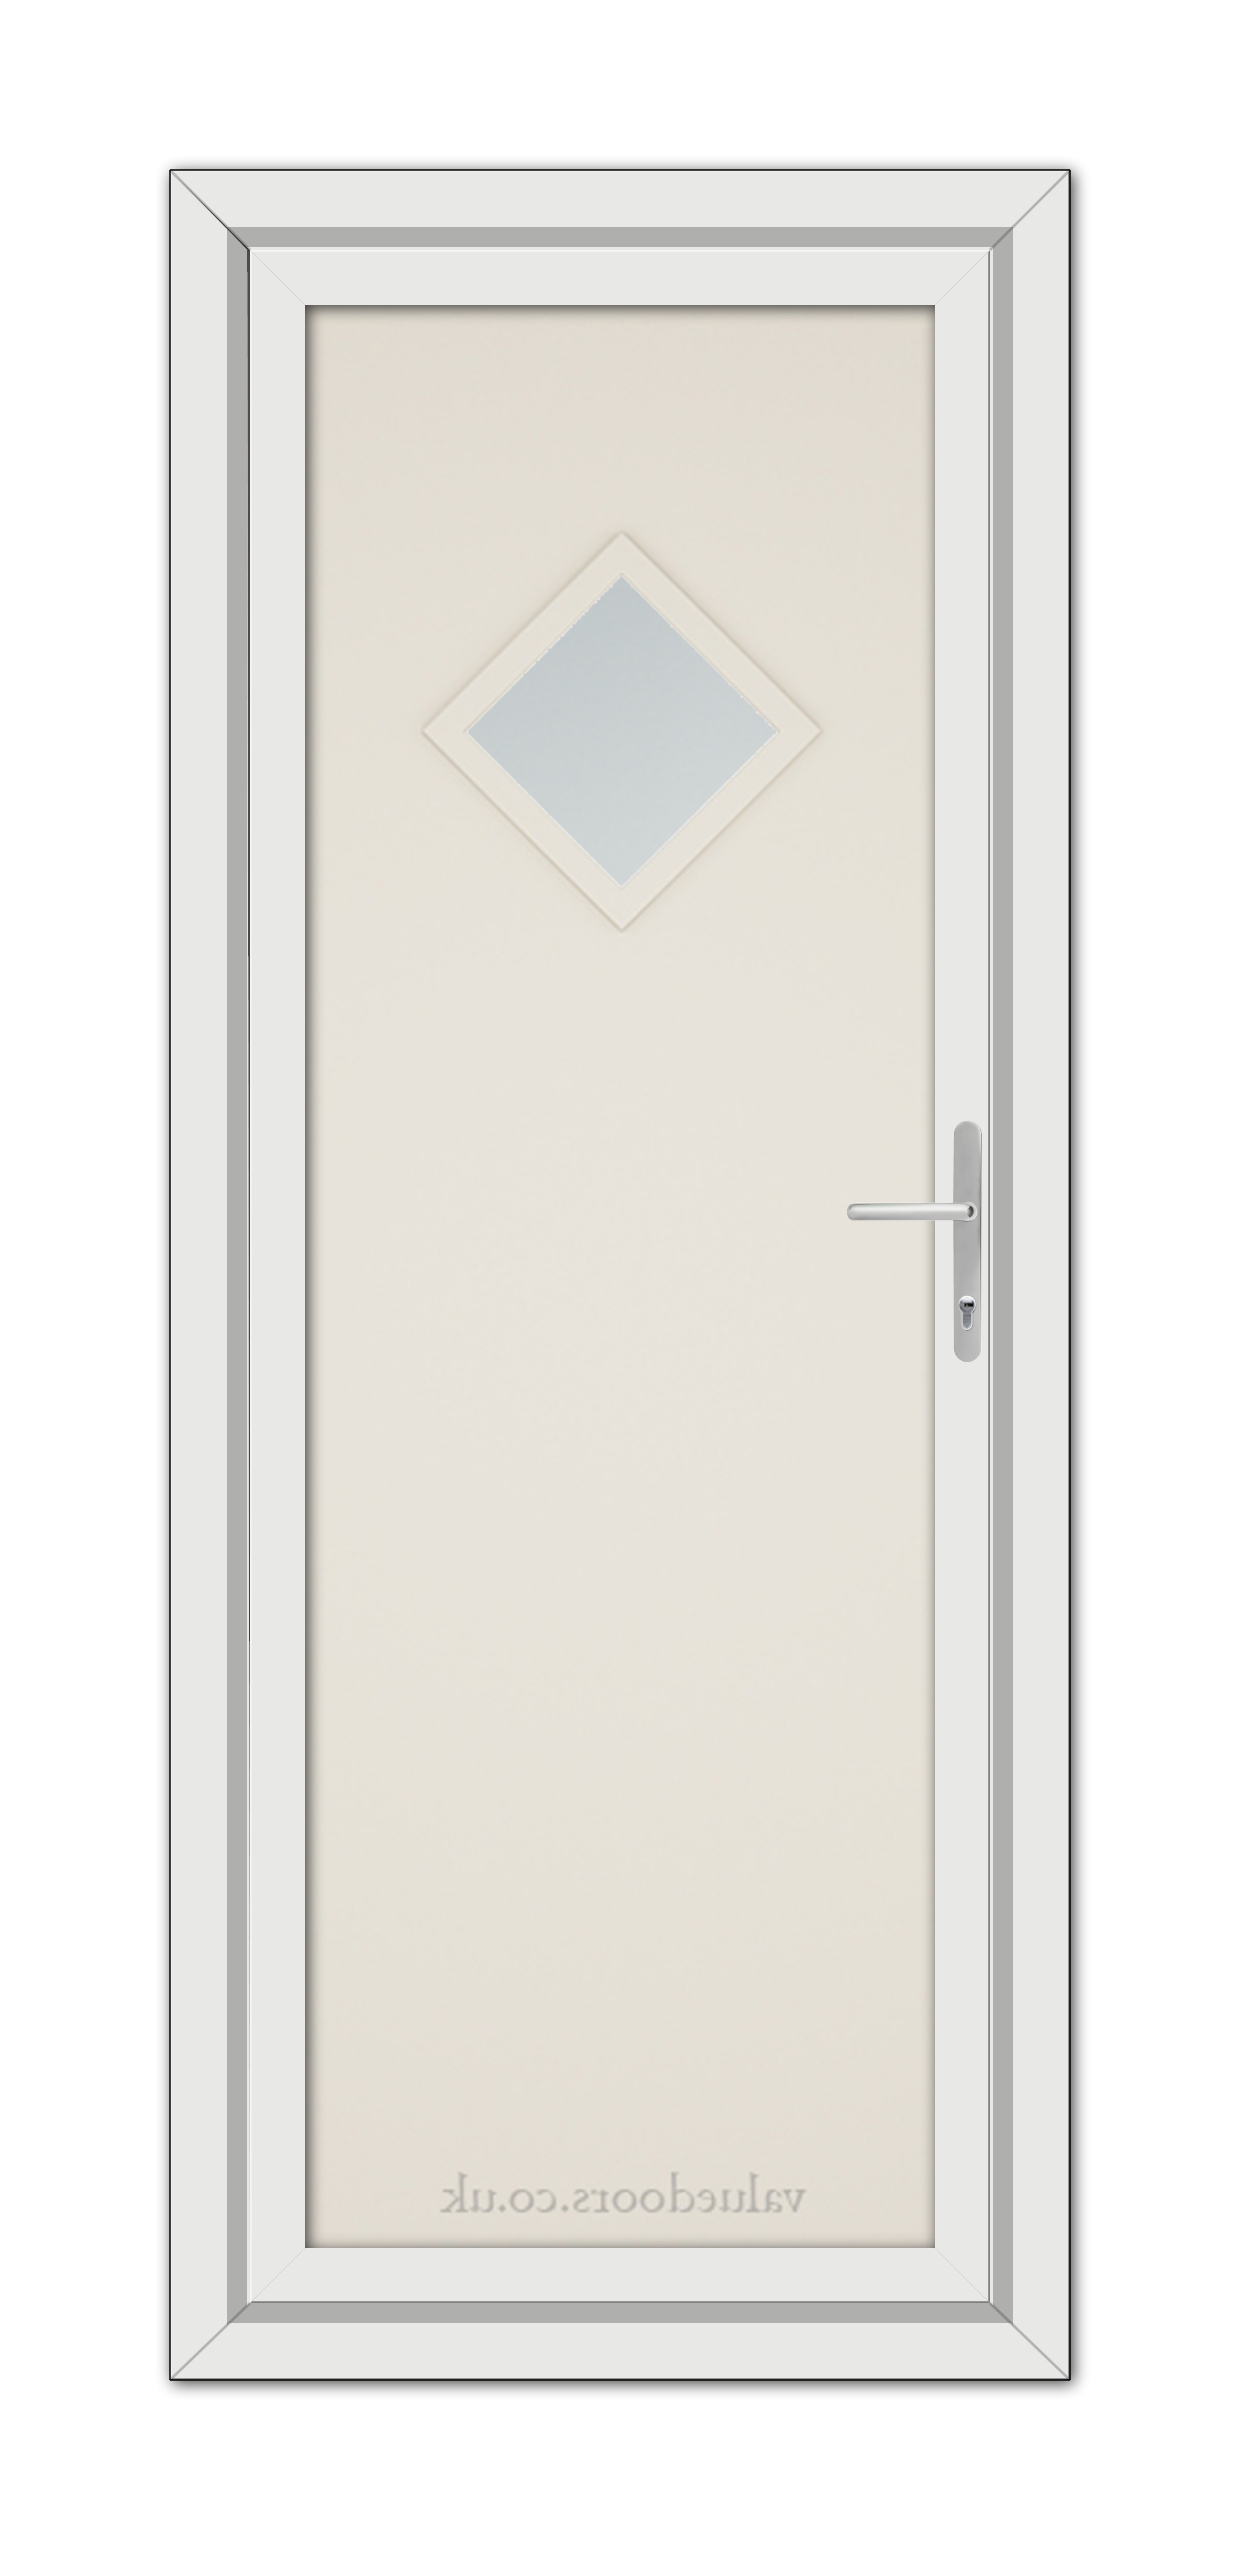 Cream Modern 5131 uPVC door with a diamond-shaped window and a metallic handle, set within a grey frame.